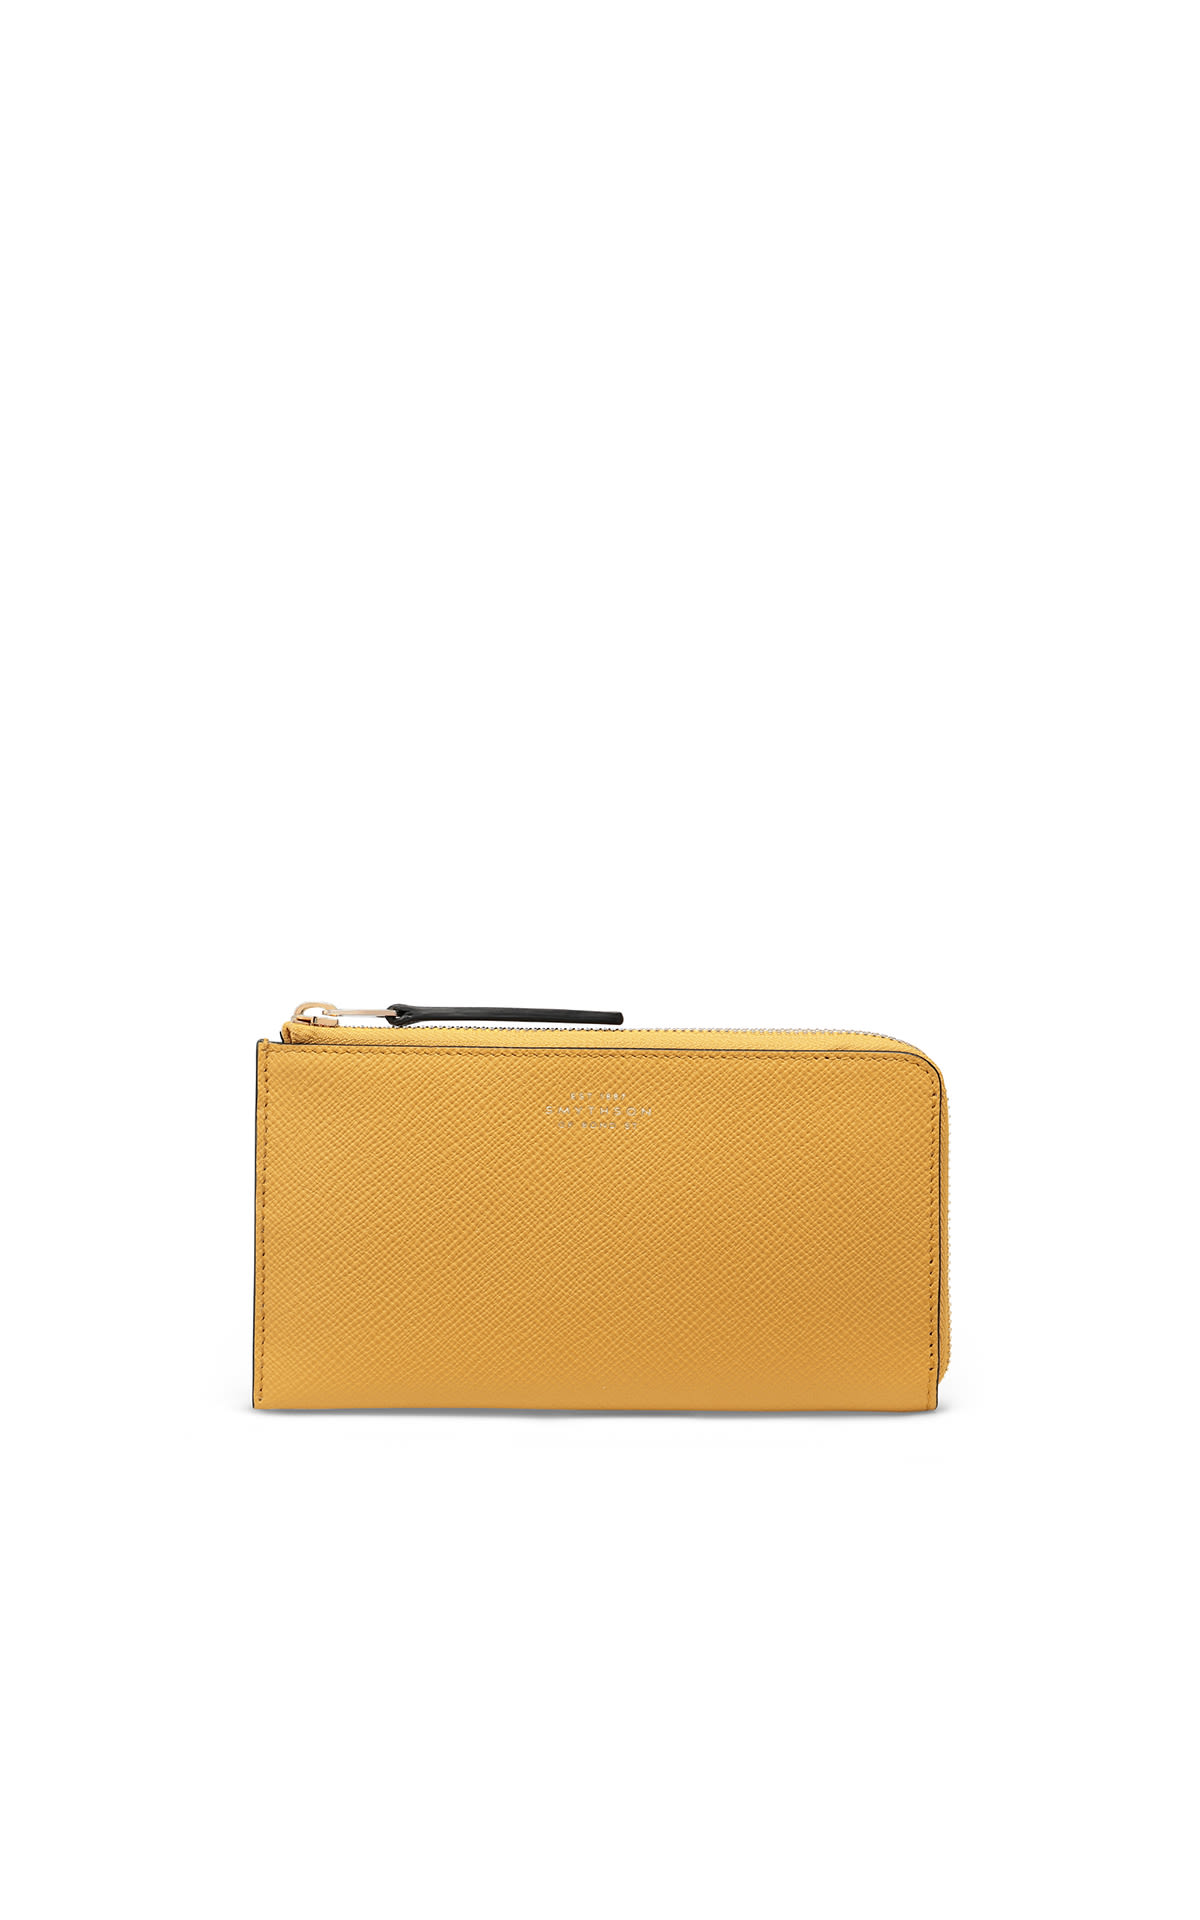 Smythson Panama purse pouch turmeric from Bicester Village